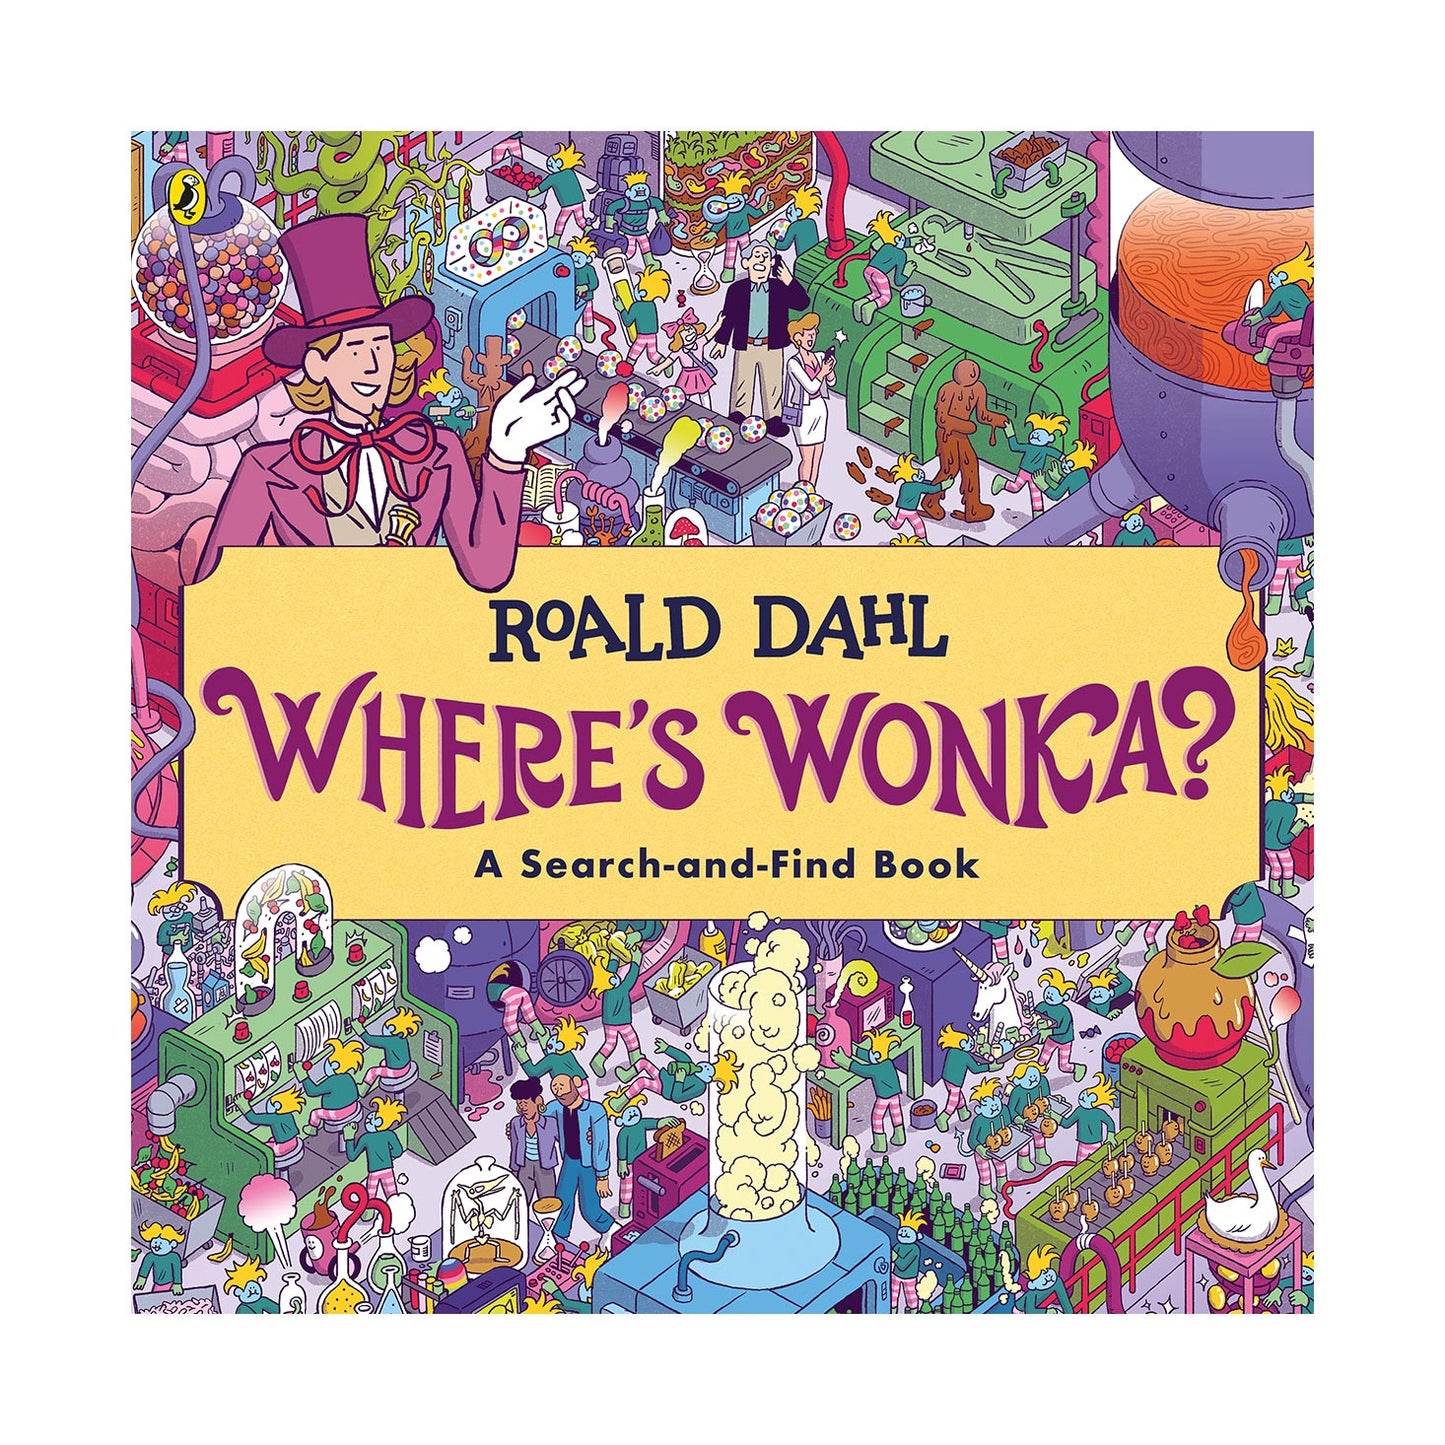 Where's Wonka, a search and find book based on Roald Dahl characters from Charlie and the Chocolate Factory